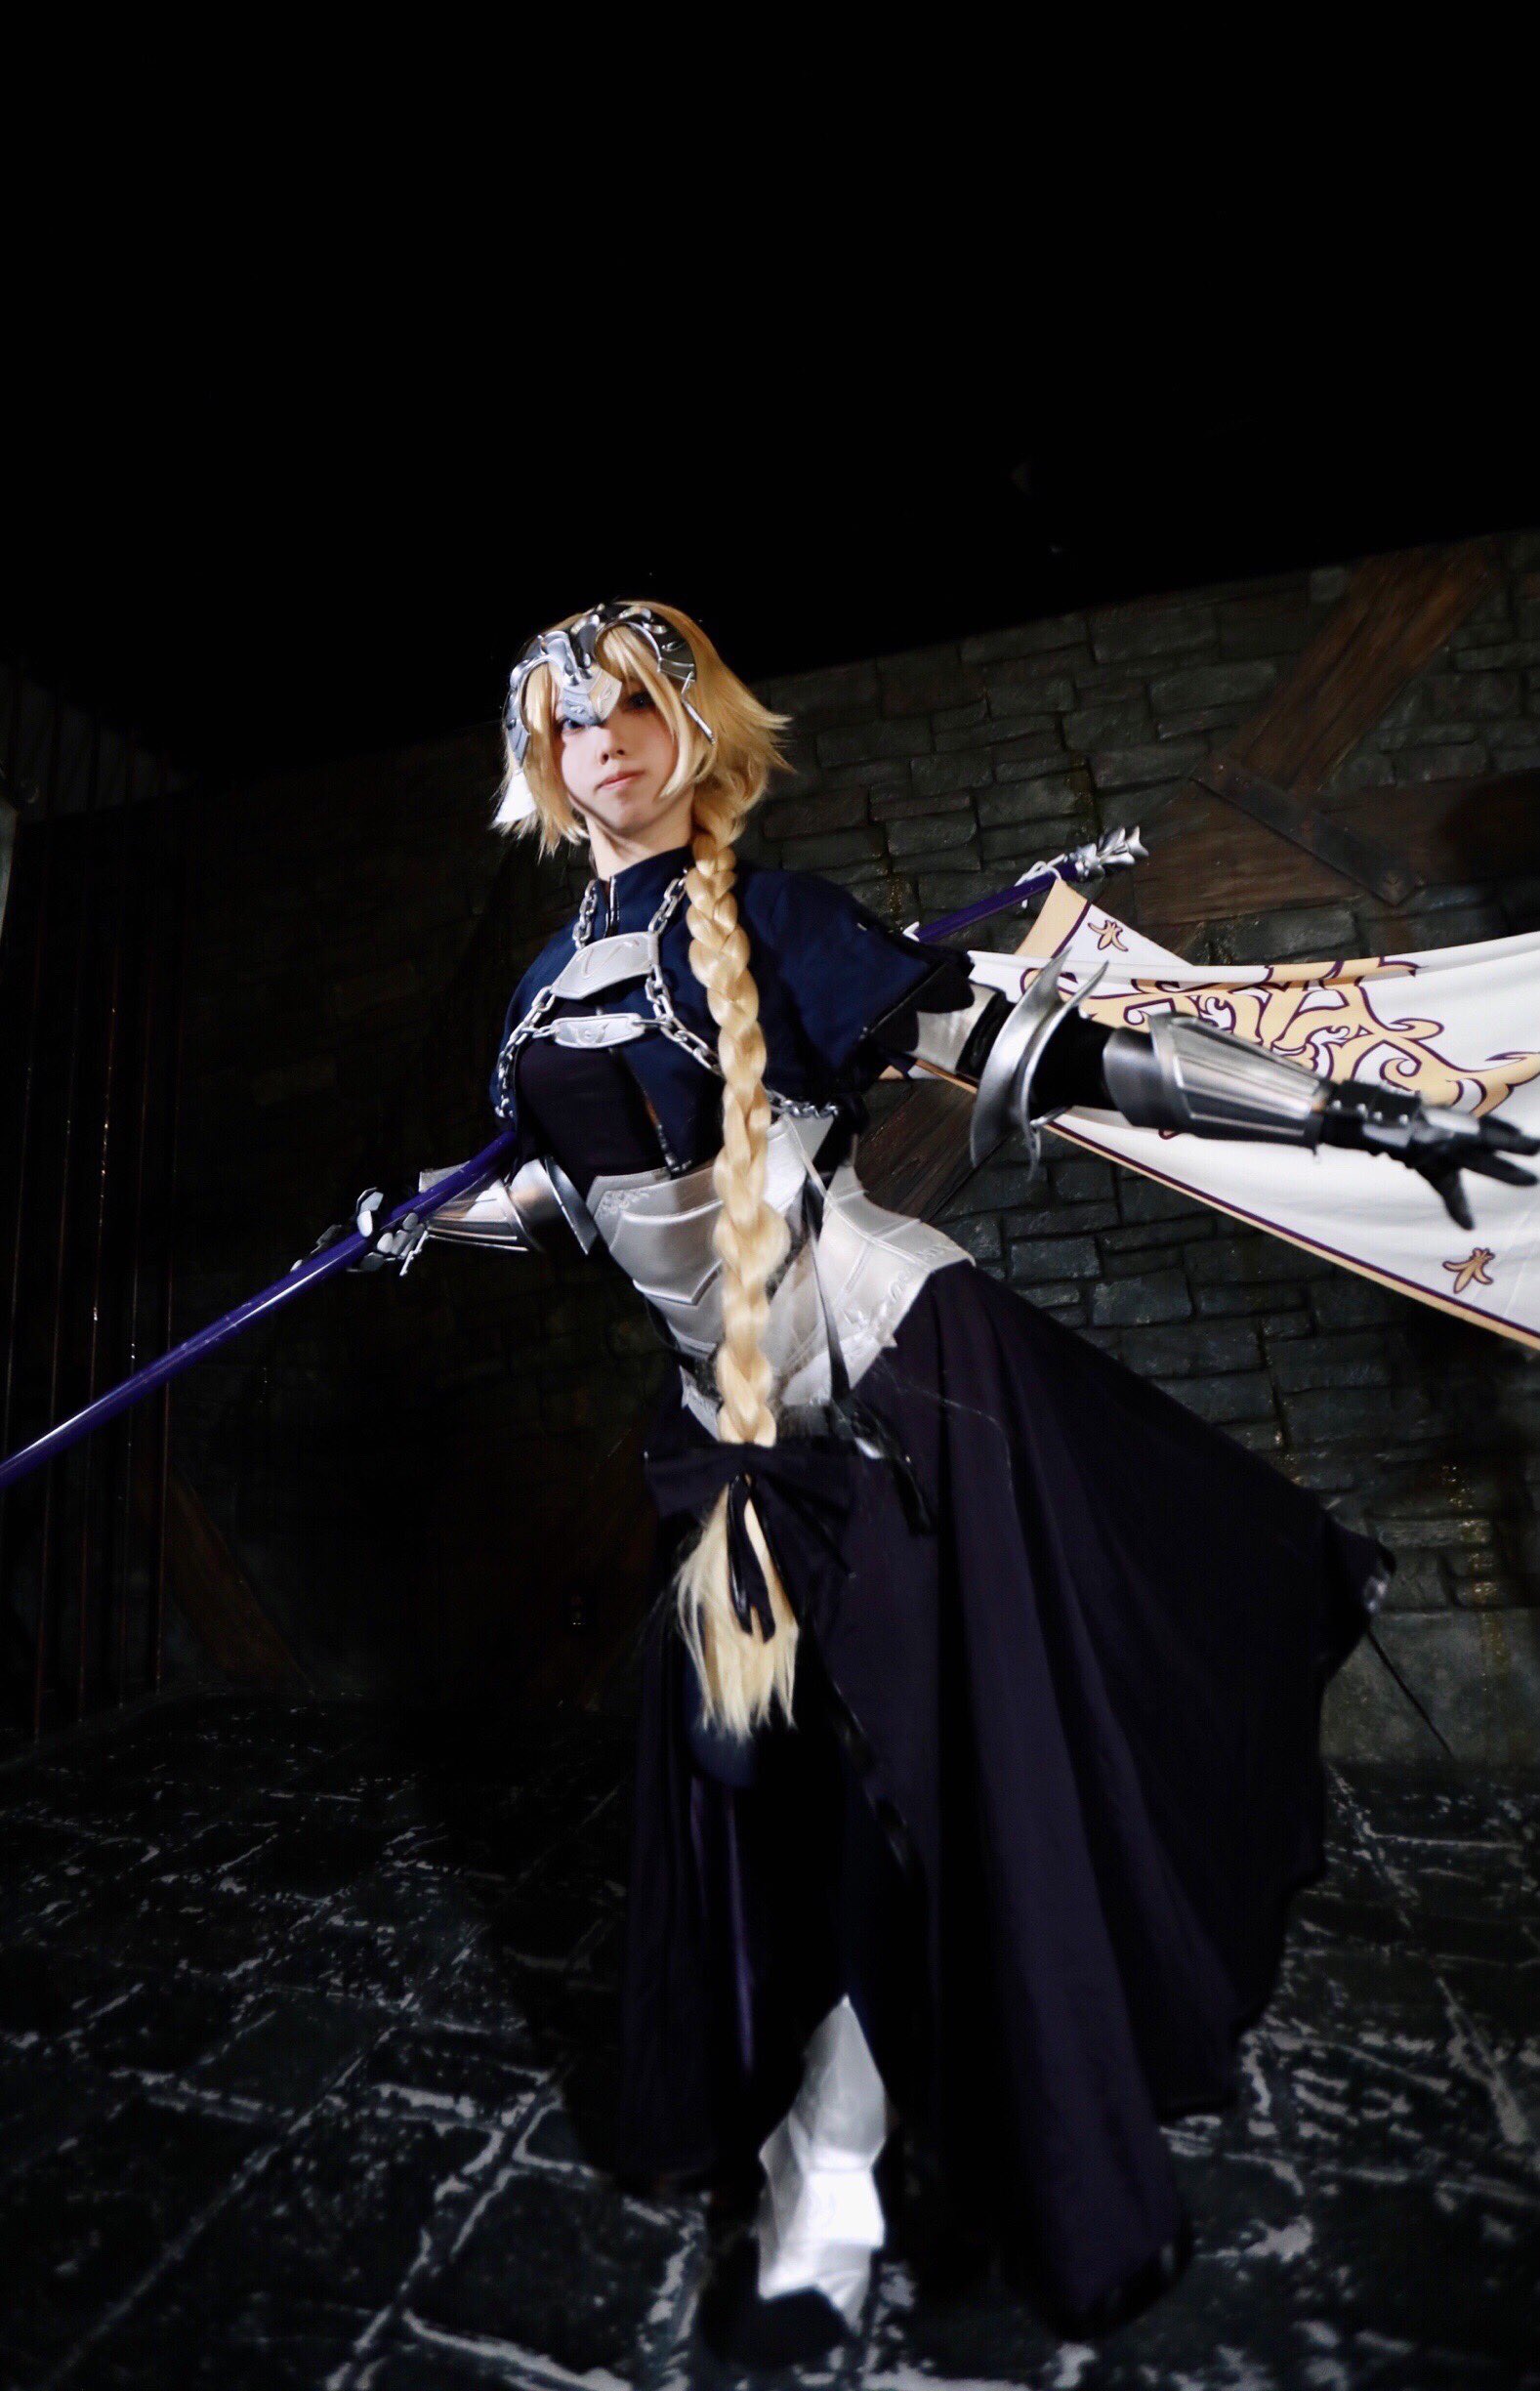 Jeanne DArc Fate Ruler Fate Apocrypha Asian Asian Cosplayer Cosplay Japanese Long Hair Blonde Japane 1577x2448